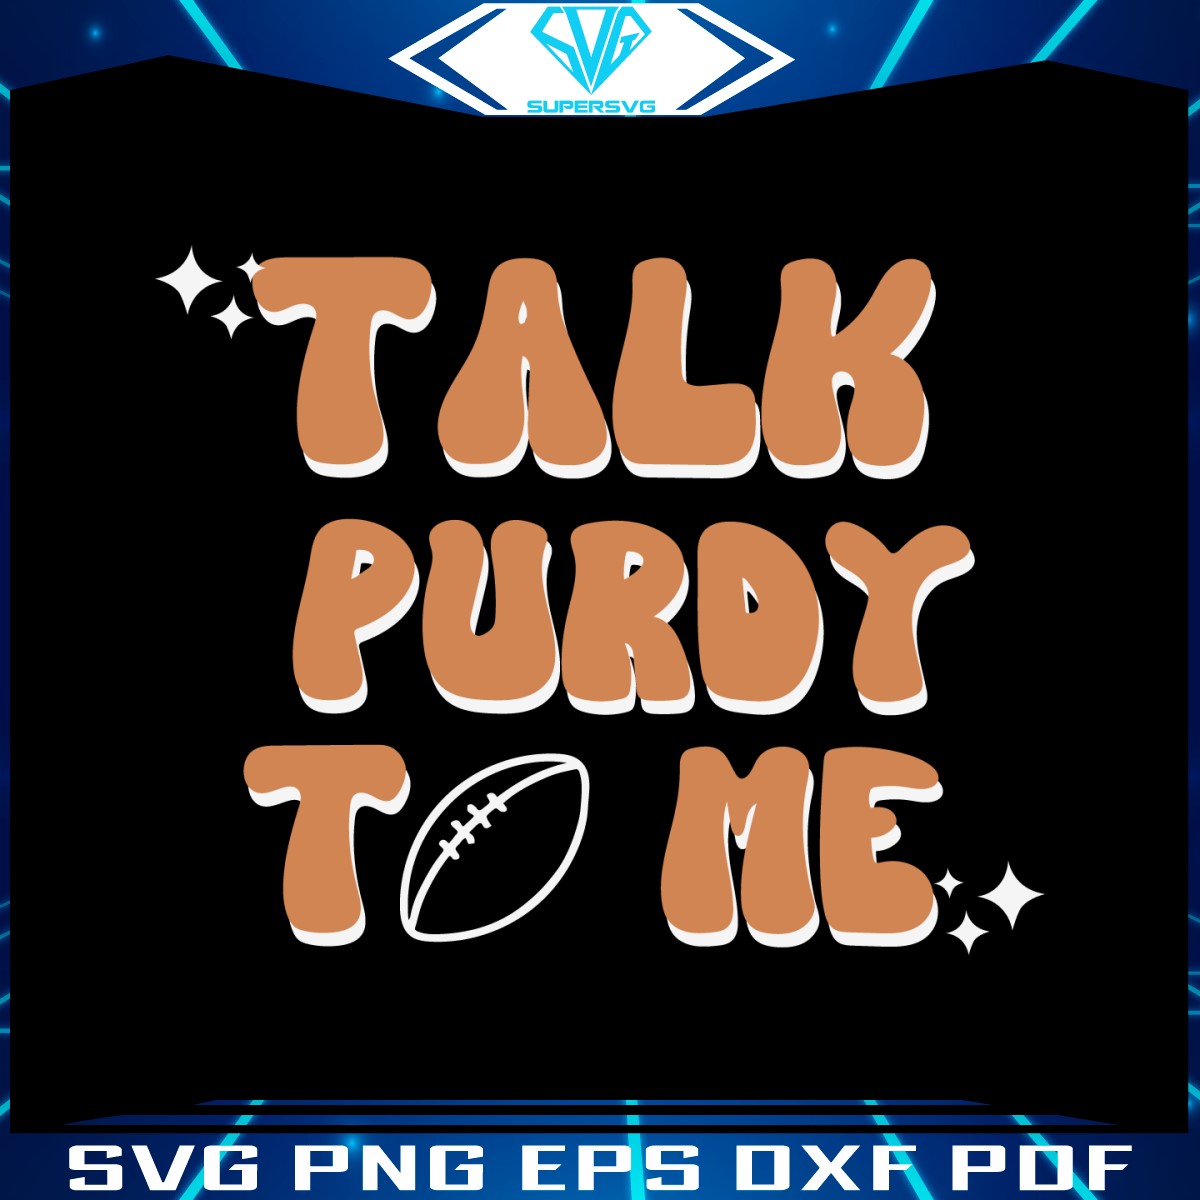 talk-purdy-to-me-49ers-football-player-svg